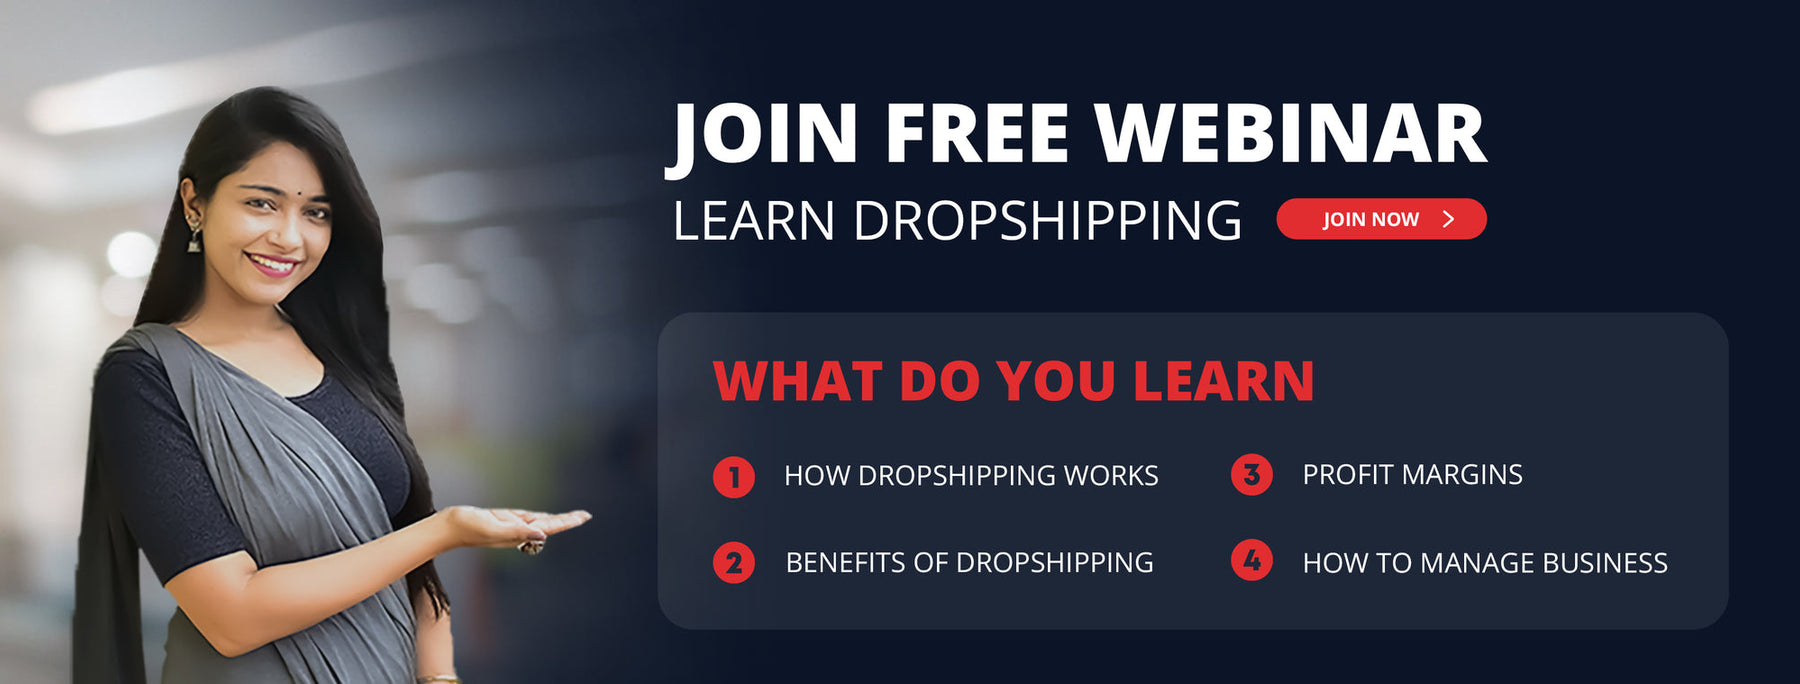 5 Key Steps to Launch Your Dropshipping Business and Rule the Indian E-commerce Market